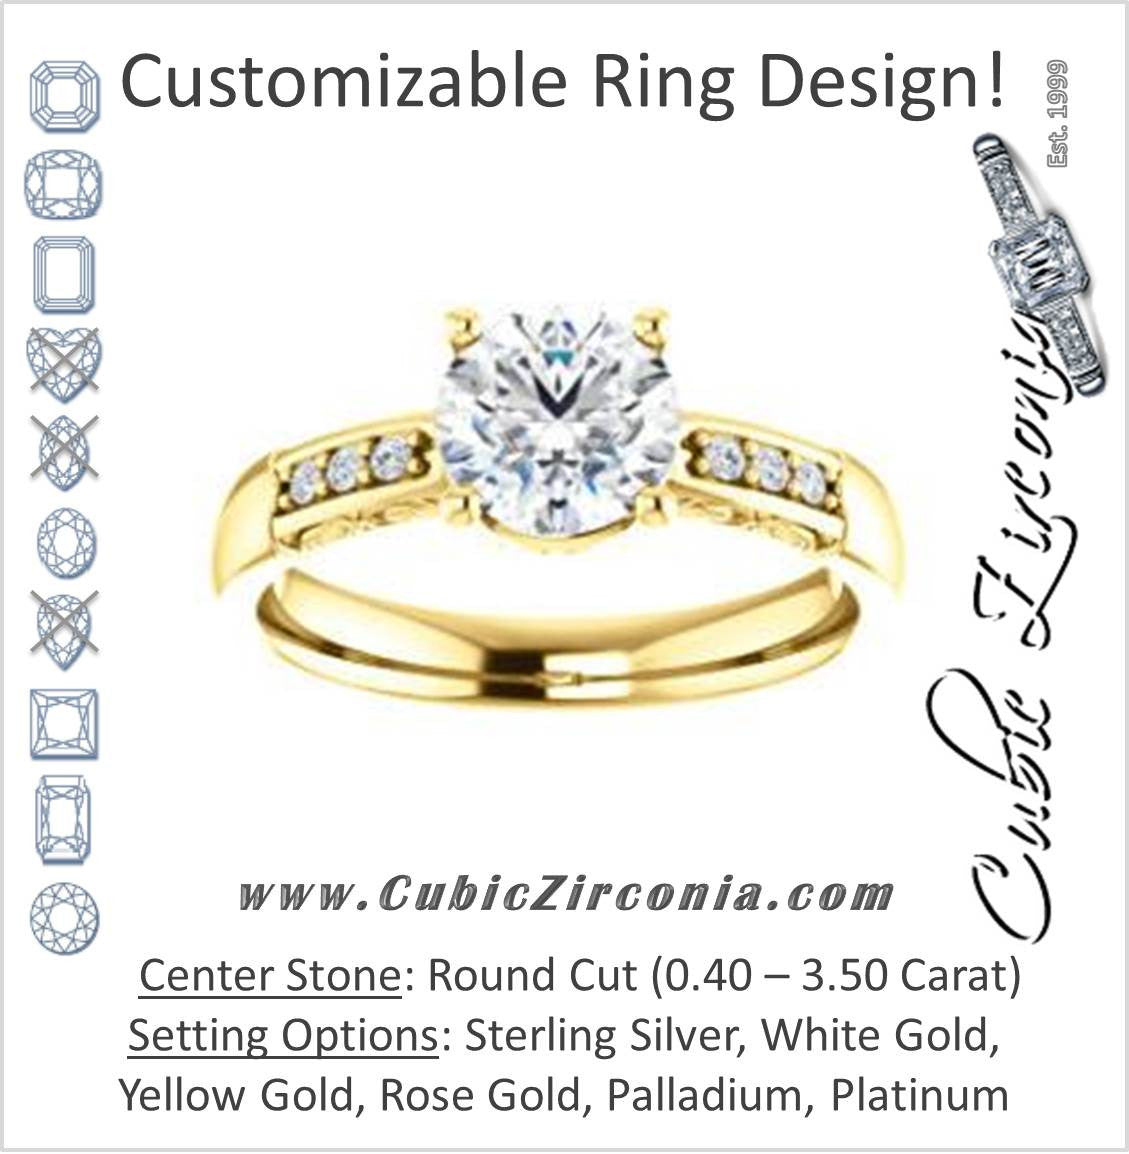 Cubic Zirconia Engagement Ring- The Migdala (Customizable 7-stone Round Cut Design with Round Channel Accents & Decorative Filigree)